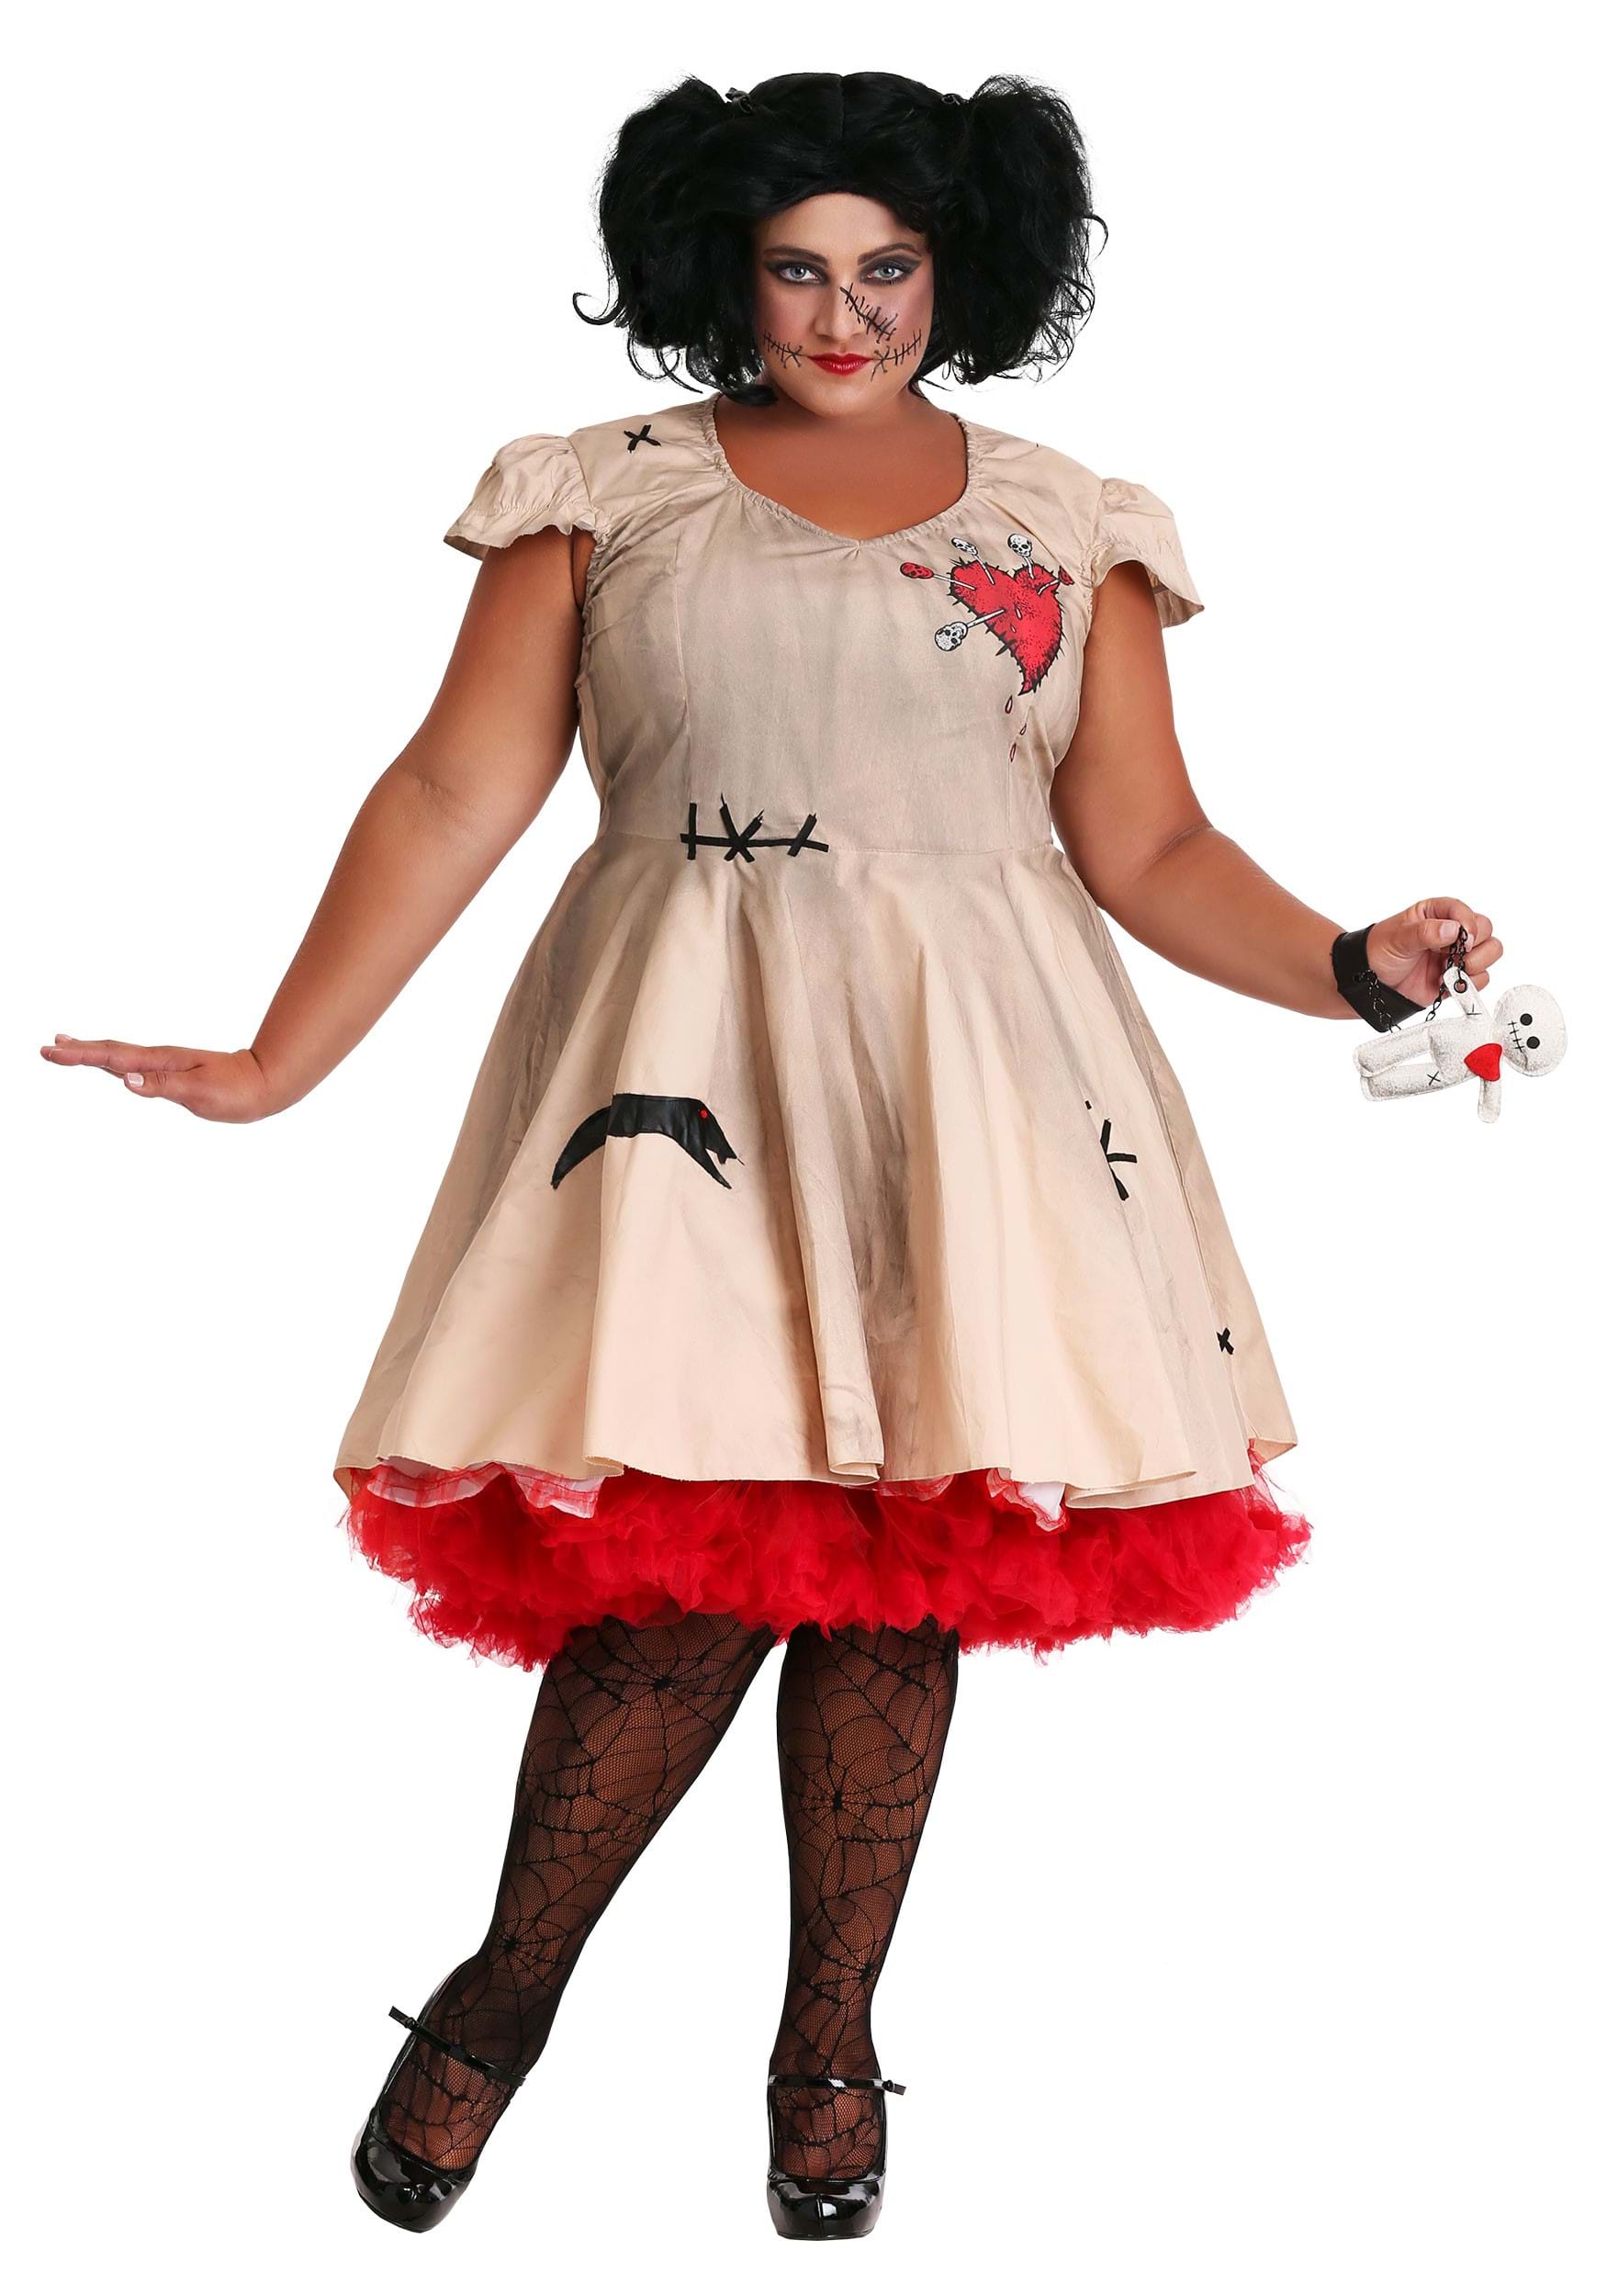 Image of Plus Size Voodoo Doll Costume for Women | Scary Costumes ID SG90106X1-4X